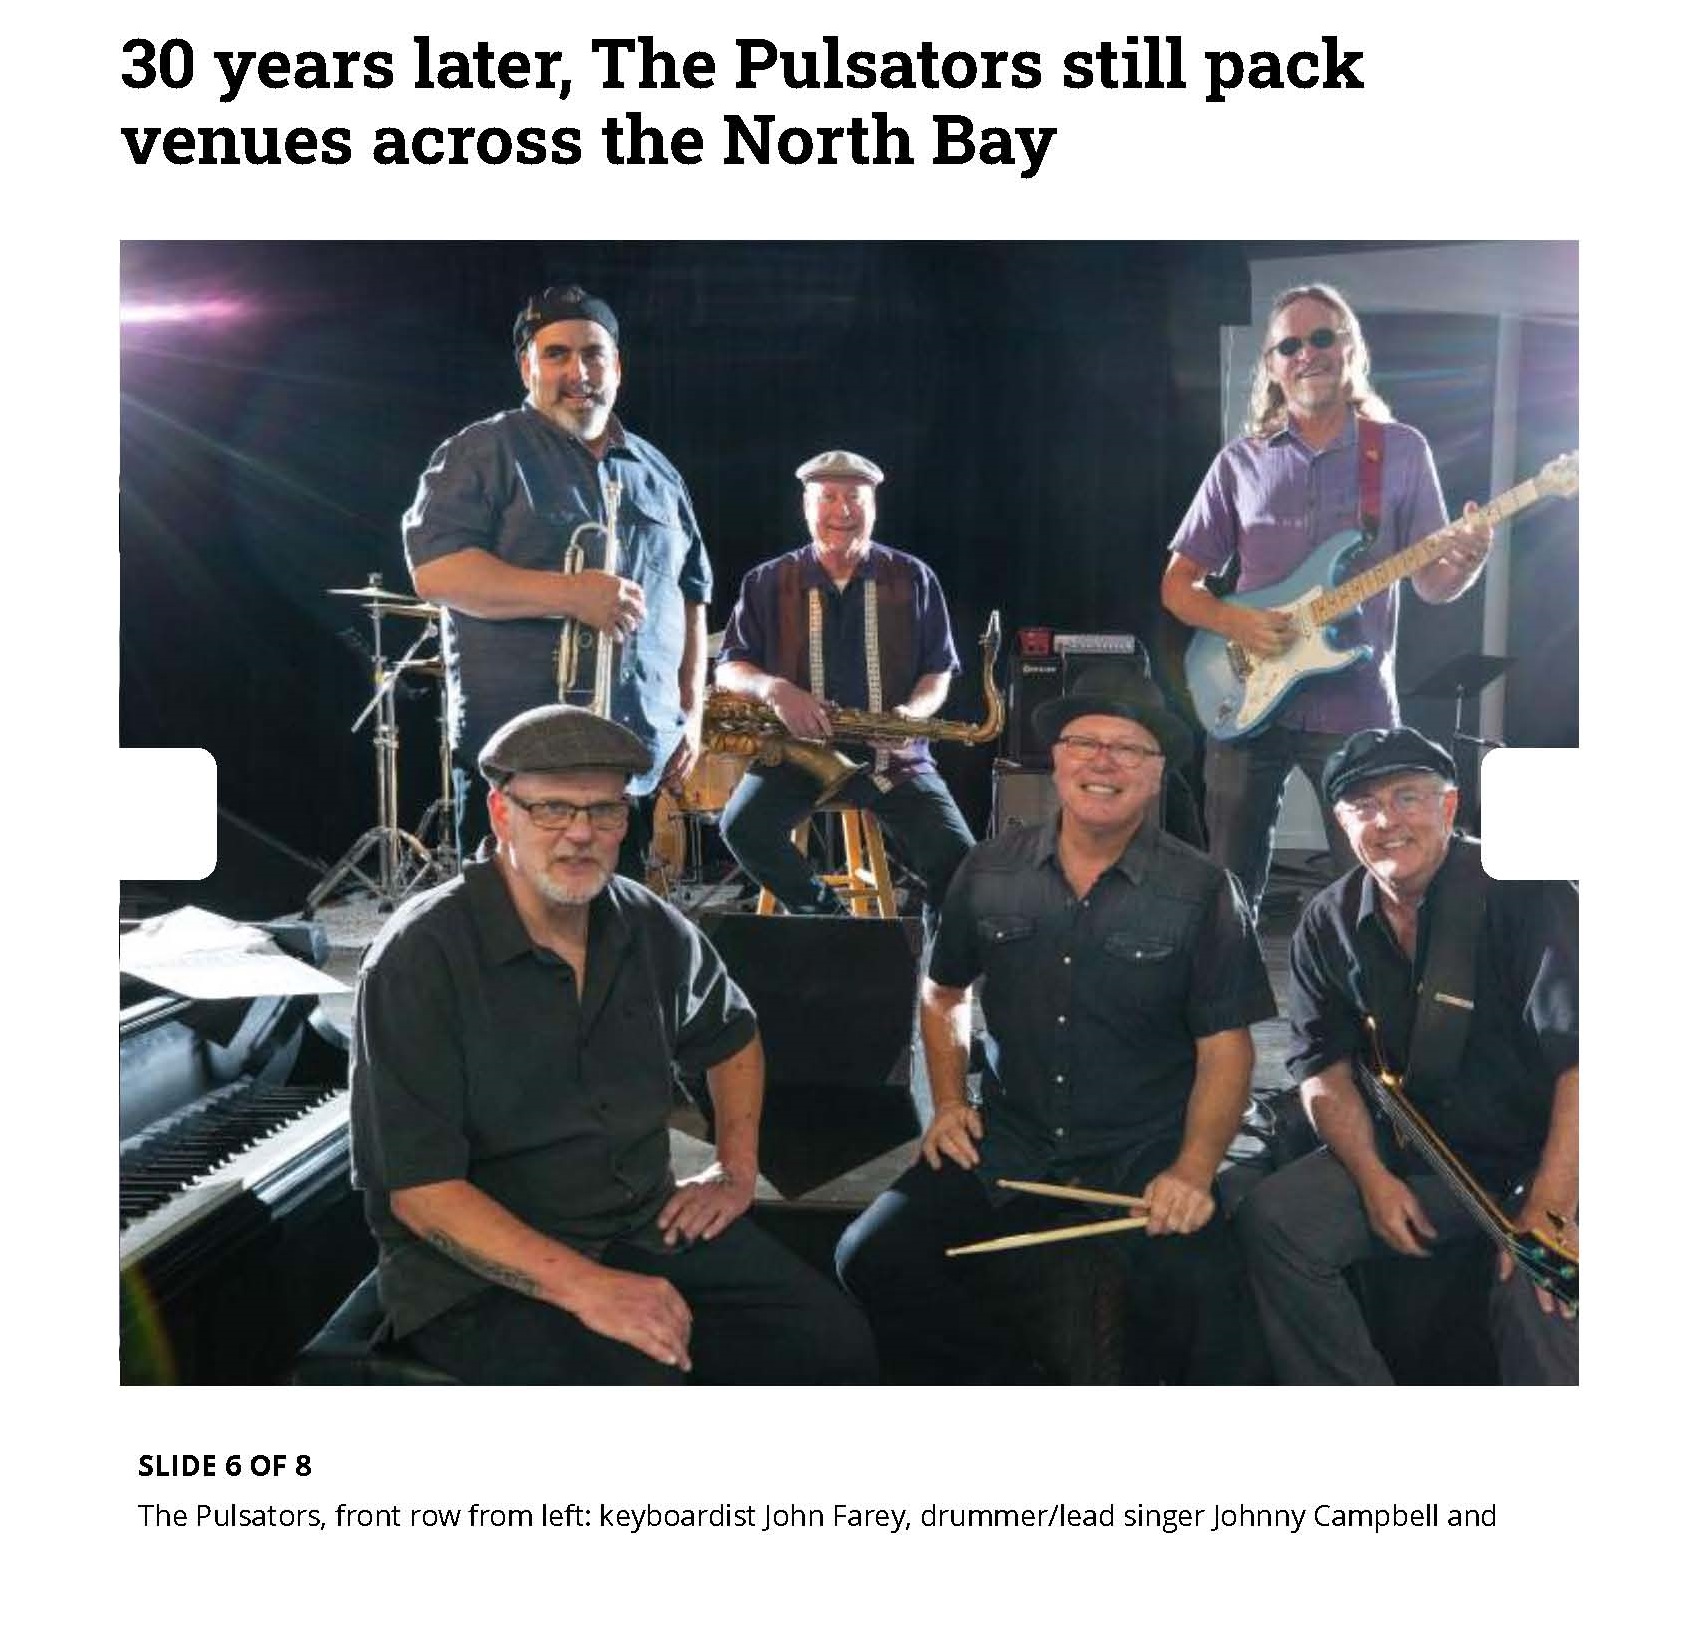 The Pulsators Rockin' Steady after 30 Years